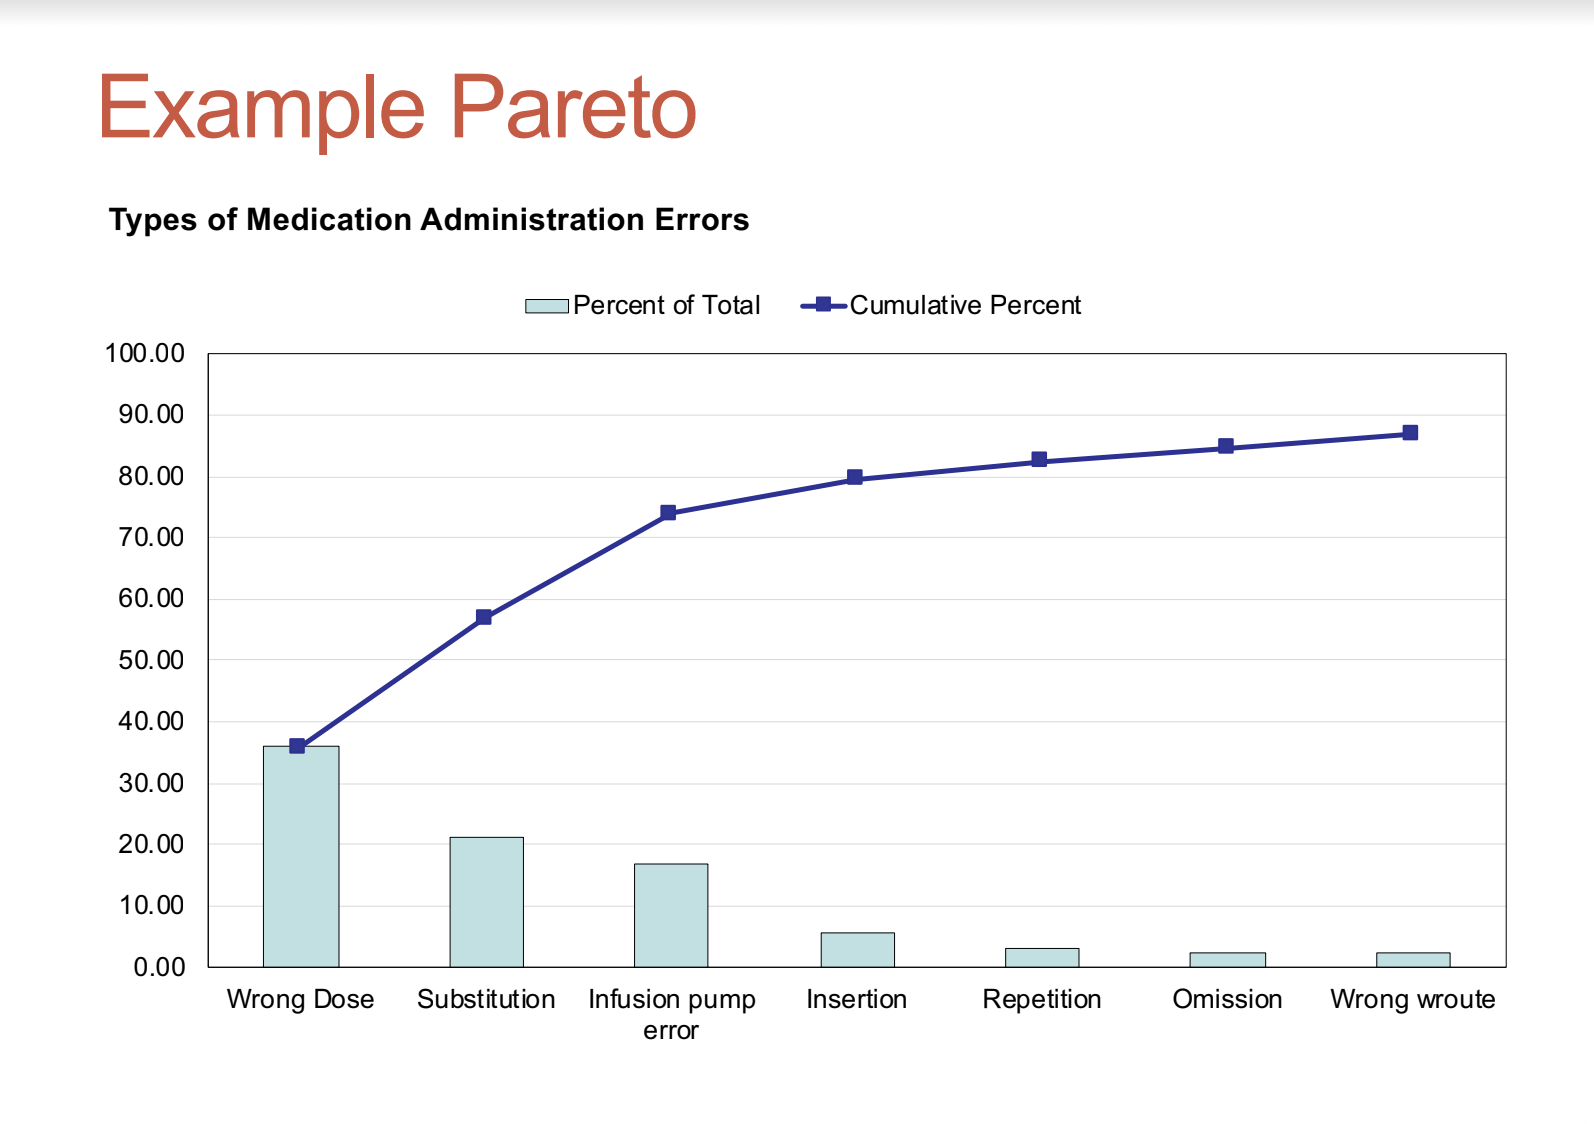 Examples Of When To Use A Pareto Chart For Six Sigma DMAIC Projects